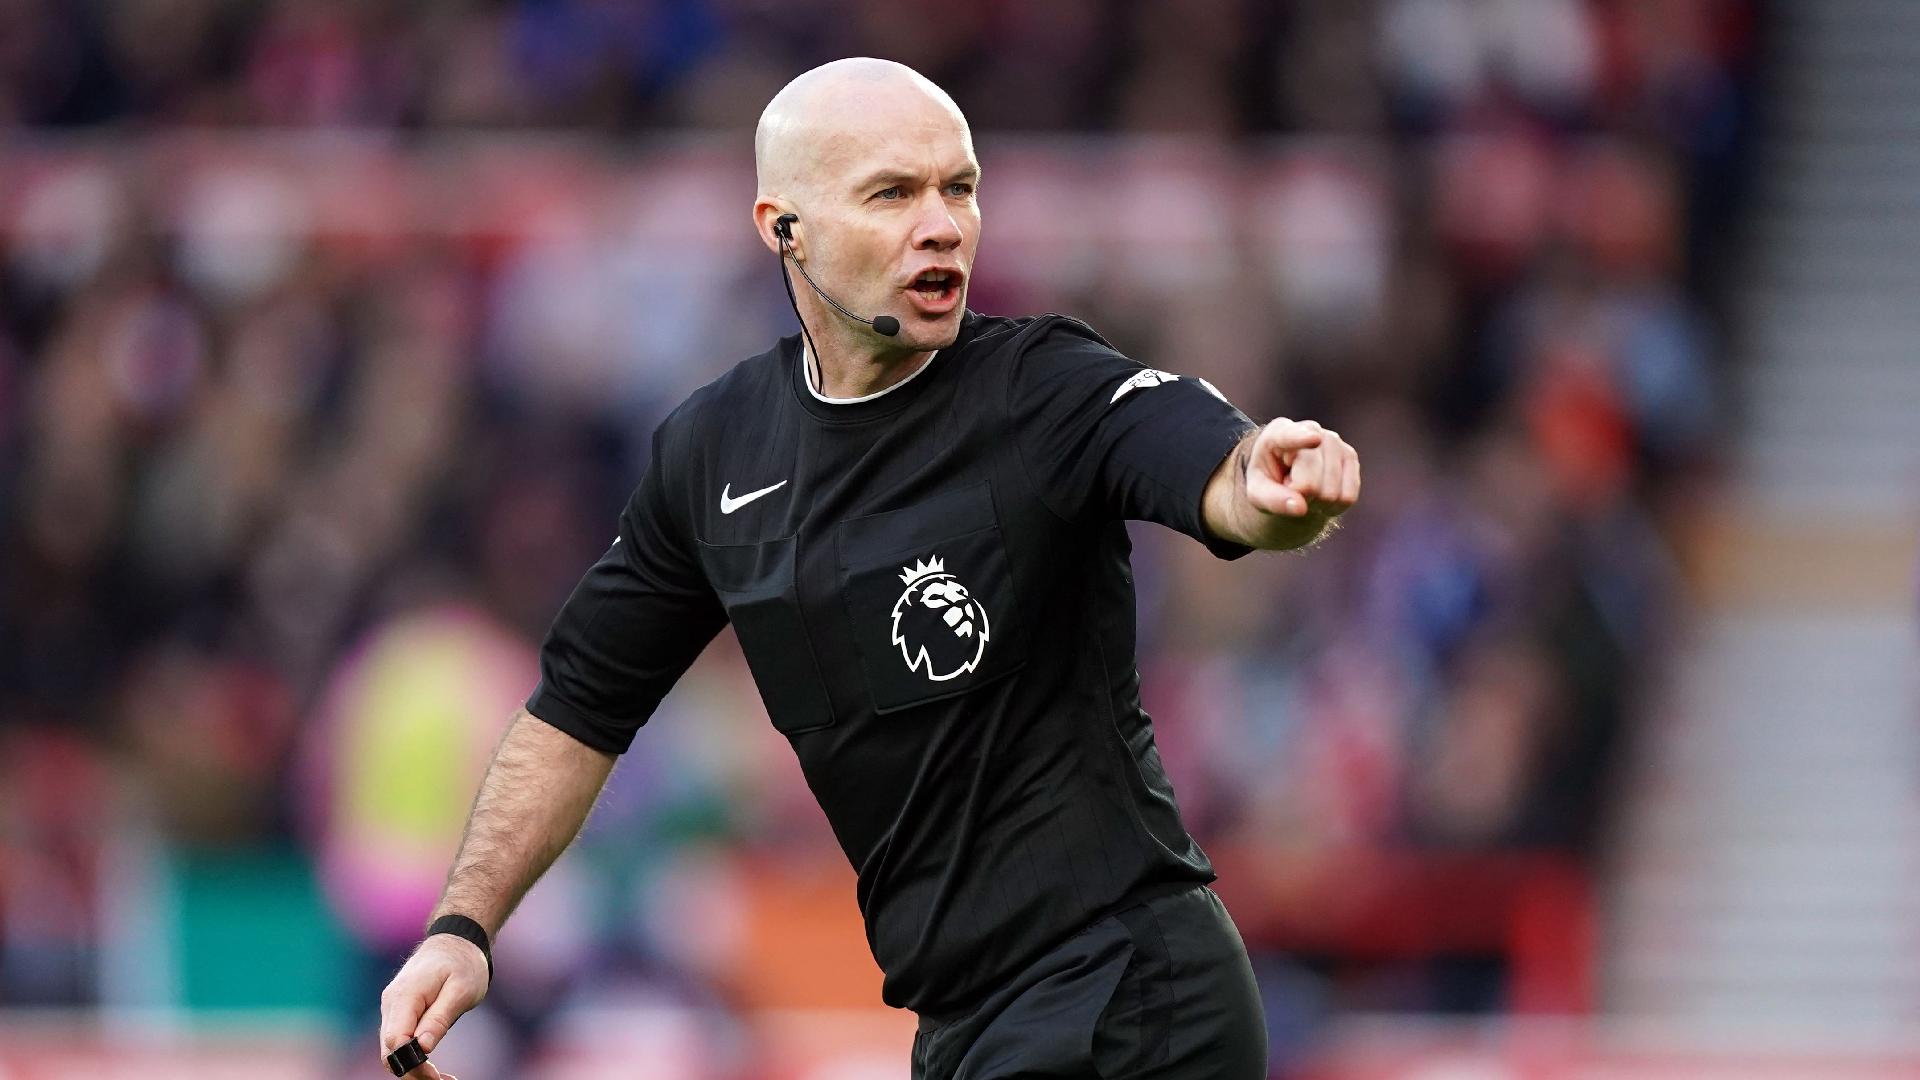 Paul Tierney will not referee game at weekend after Forest-Liverpool controversy